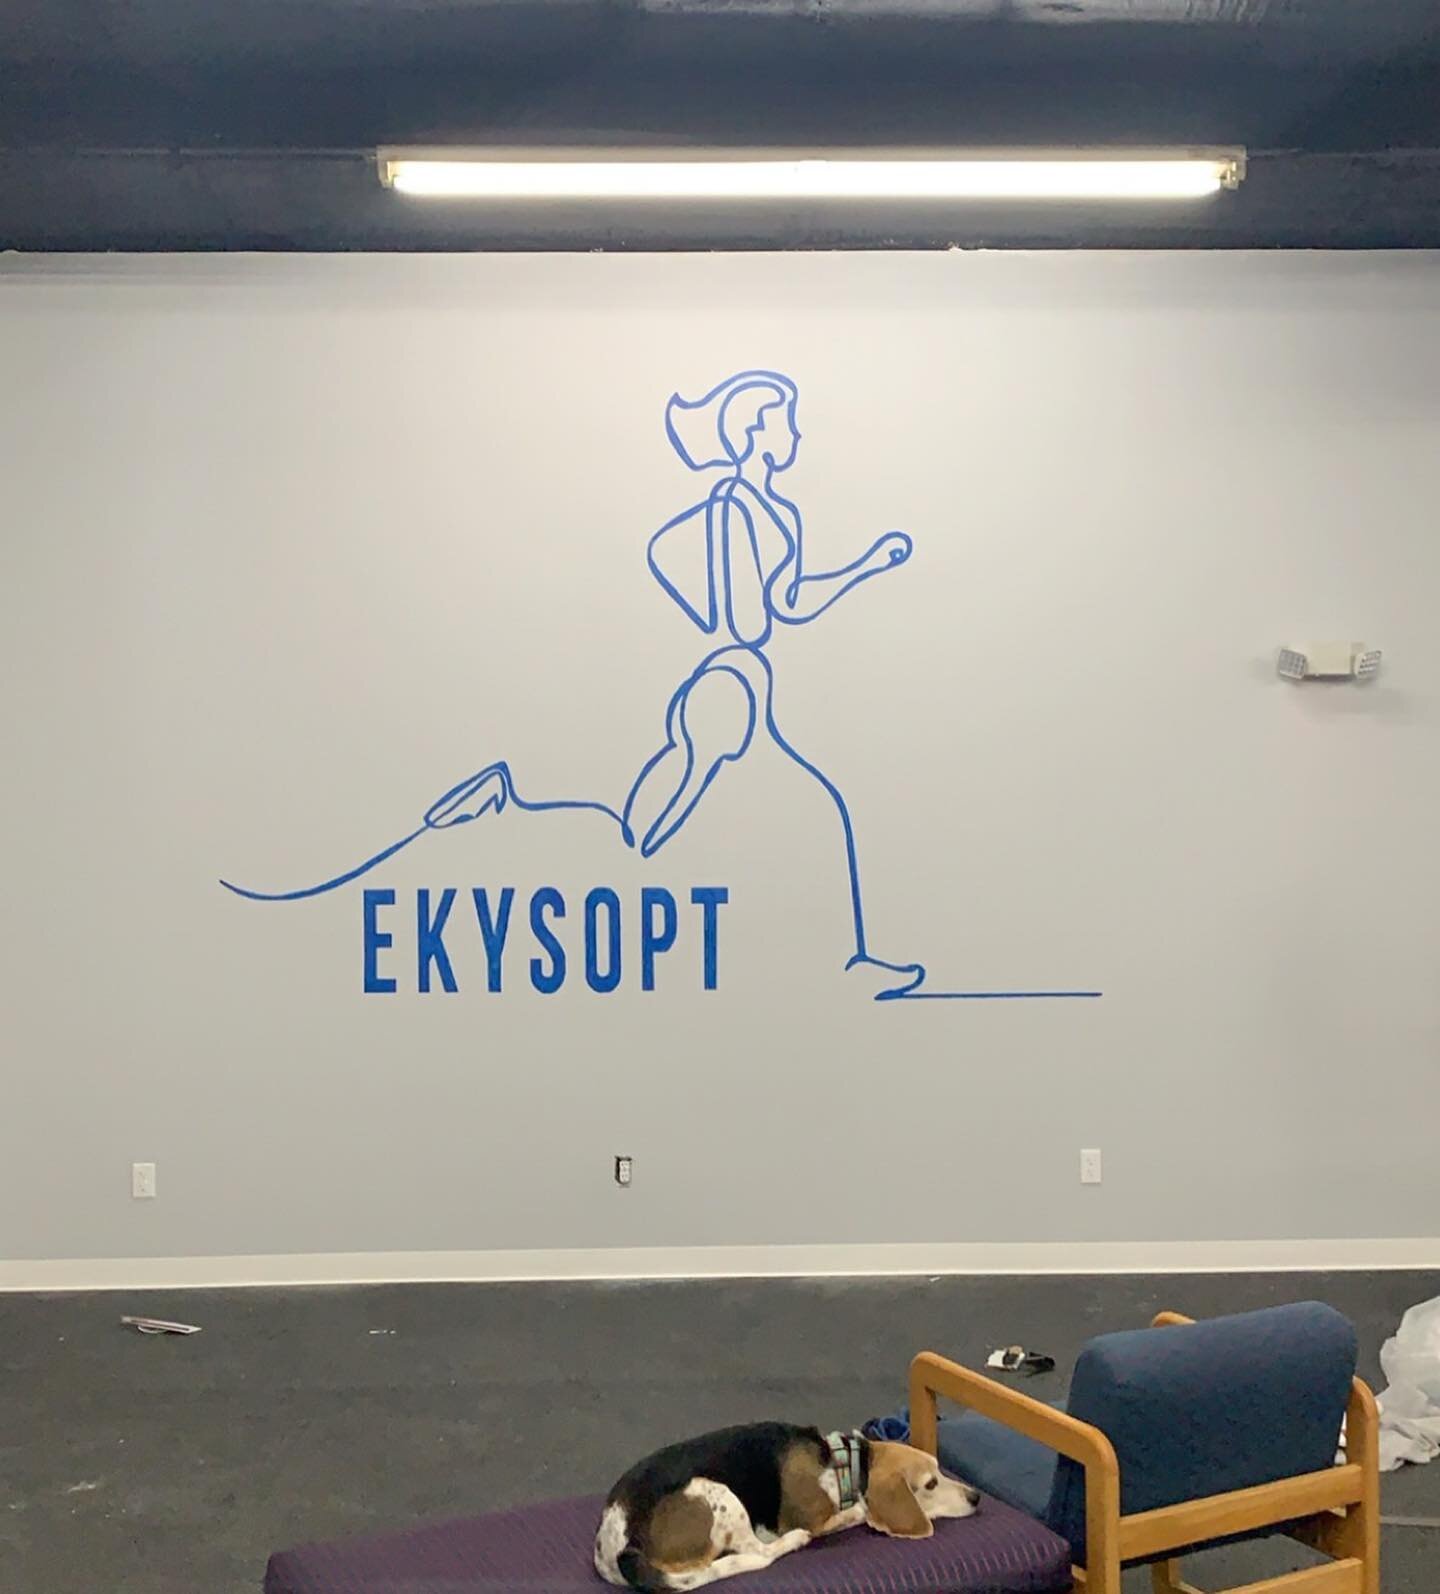 Late night painting shenanigans! We just had to feature our logo by the genius @kristinhowell23 in our clinic space. @marcdlester did the outline and I filled in the rest! #physicaltherapy #sportsphysicaltherapy #marketing #logo #clinic #gym